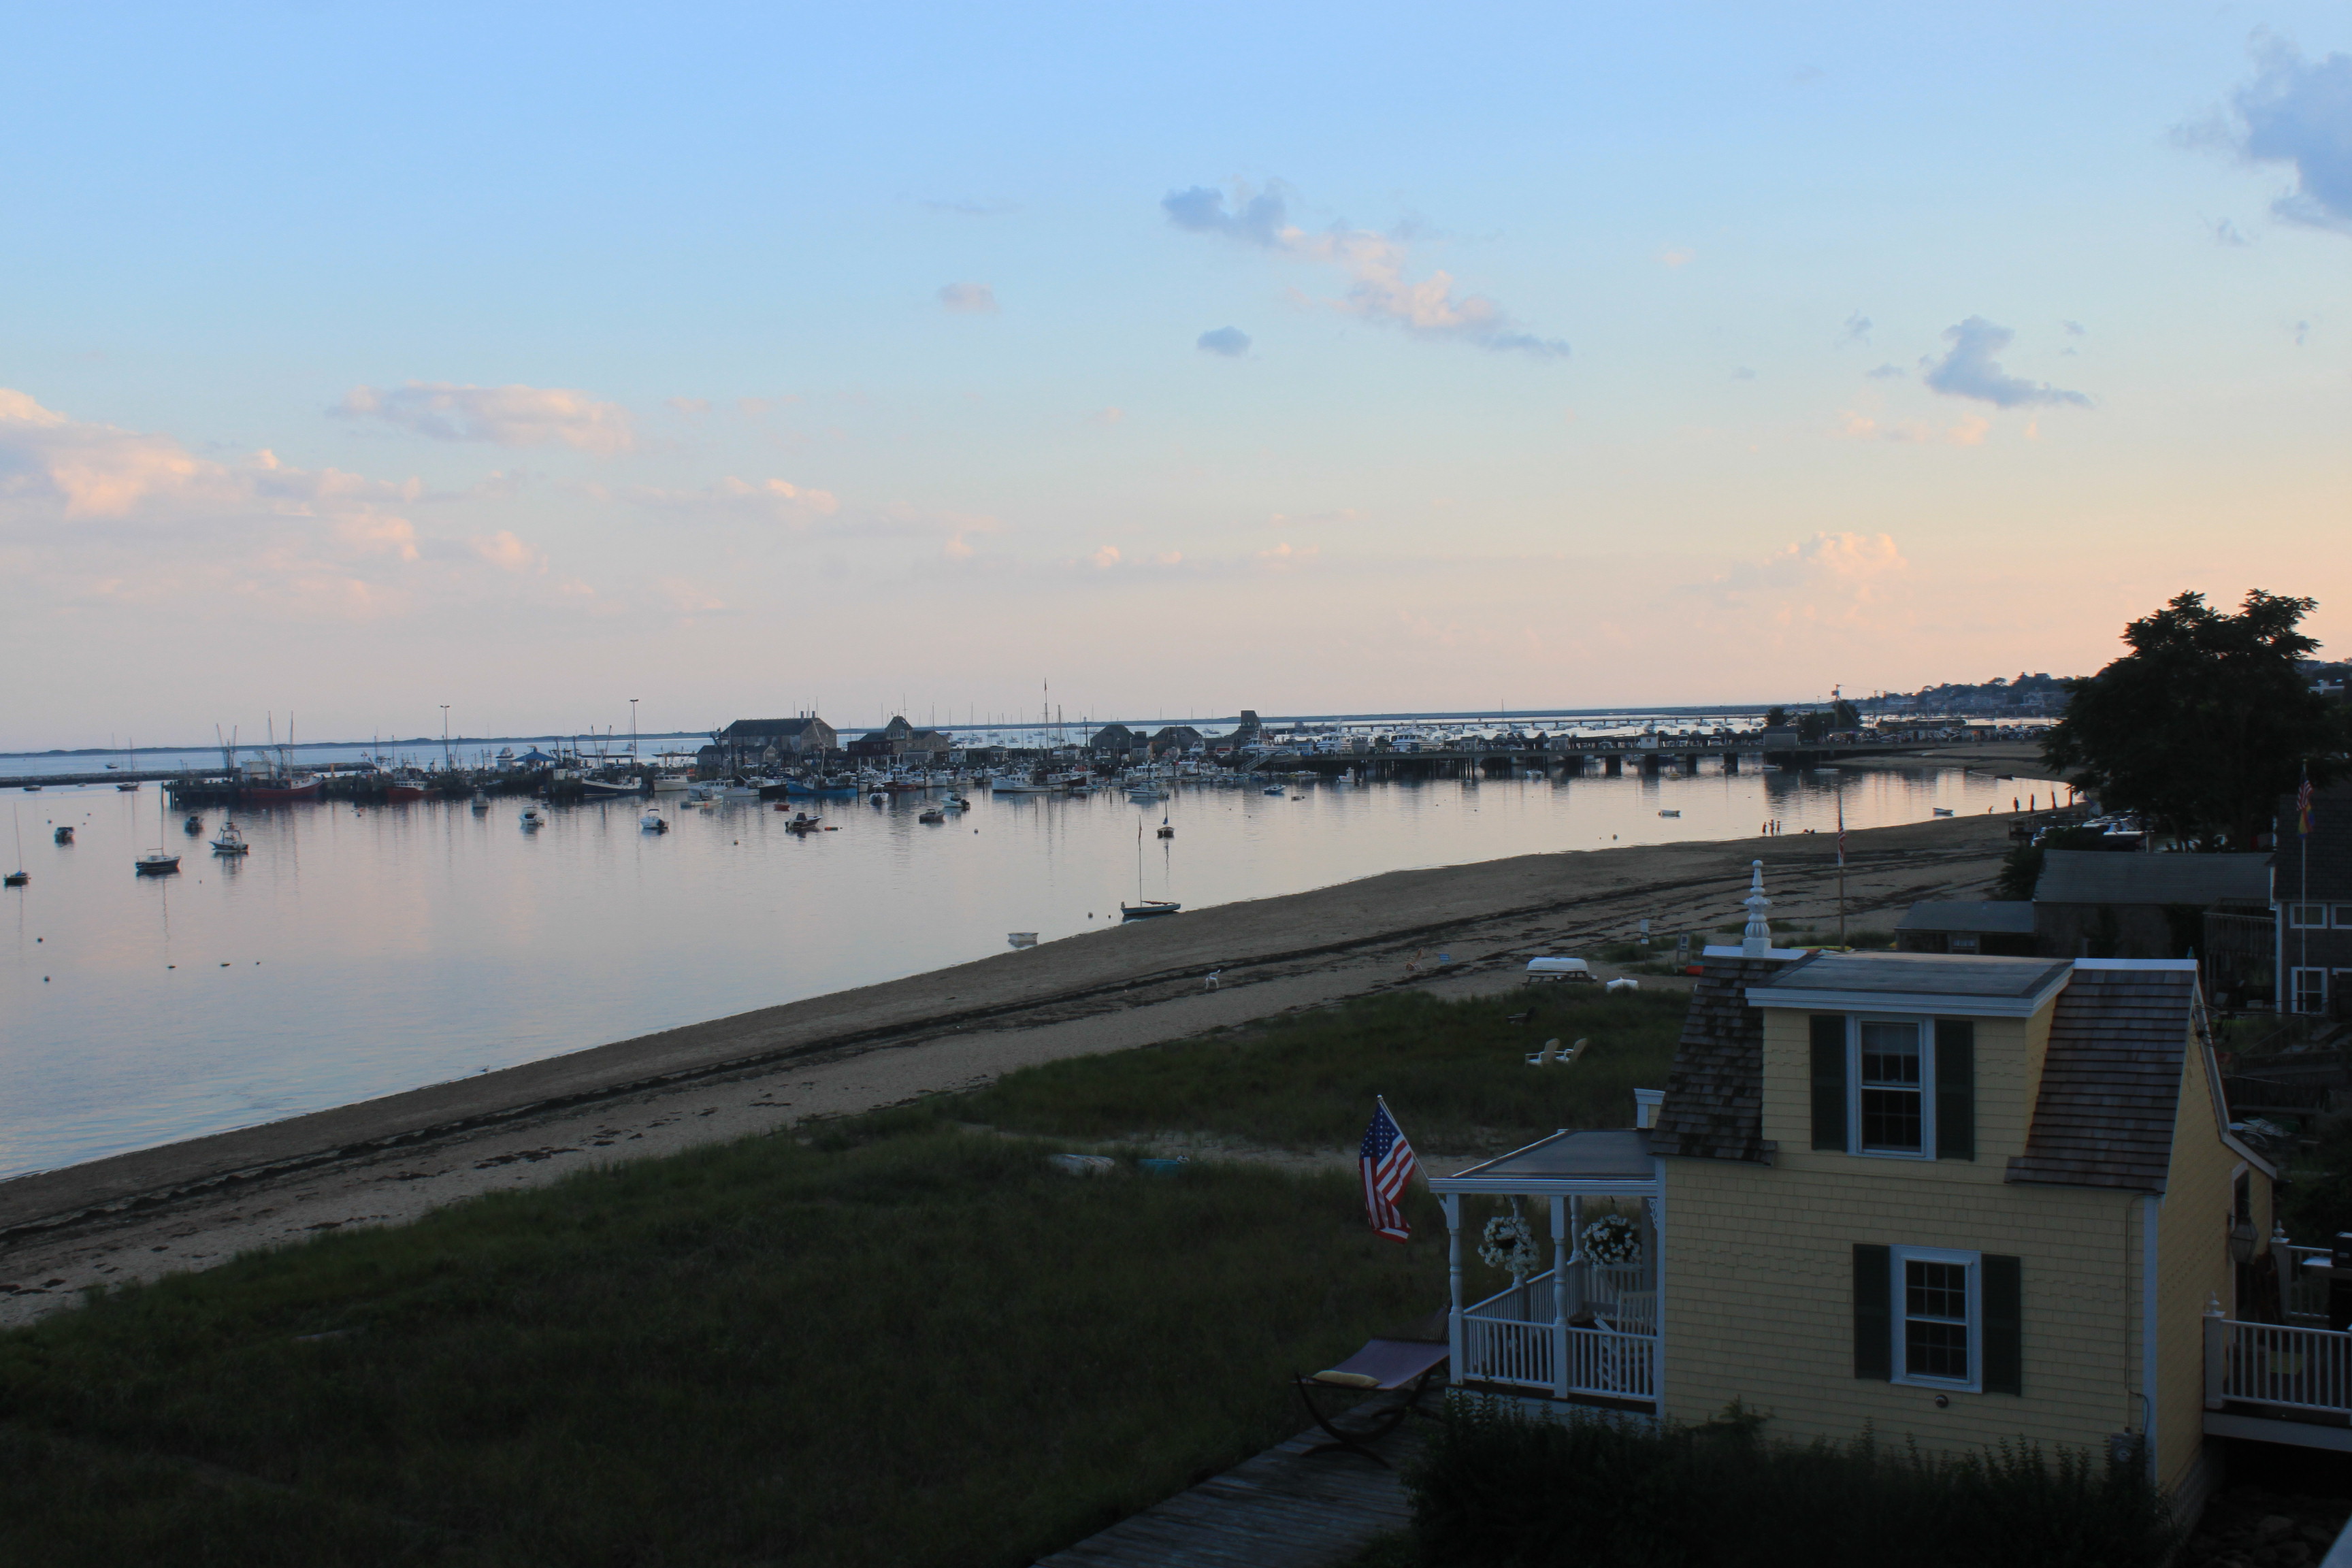 Spent a week in beautiful Provincetown